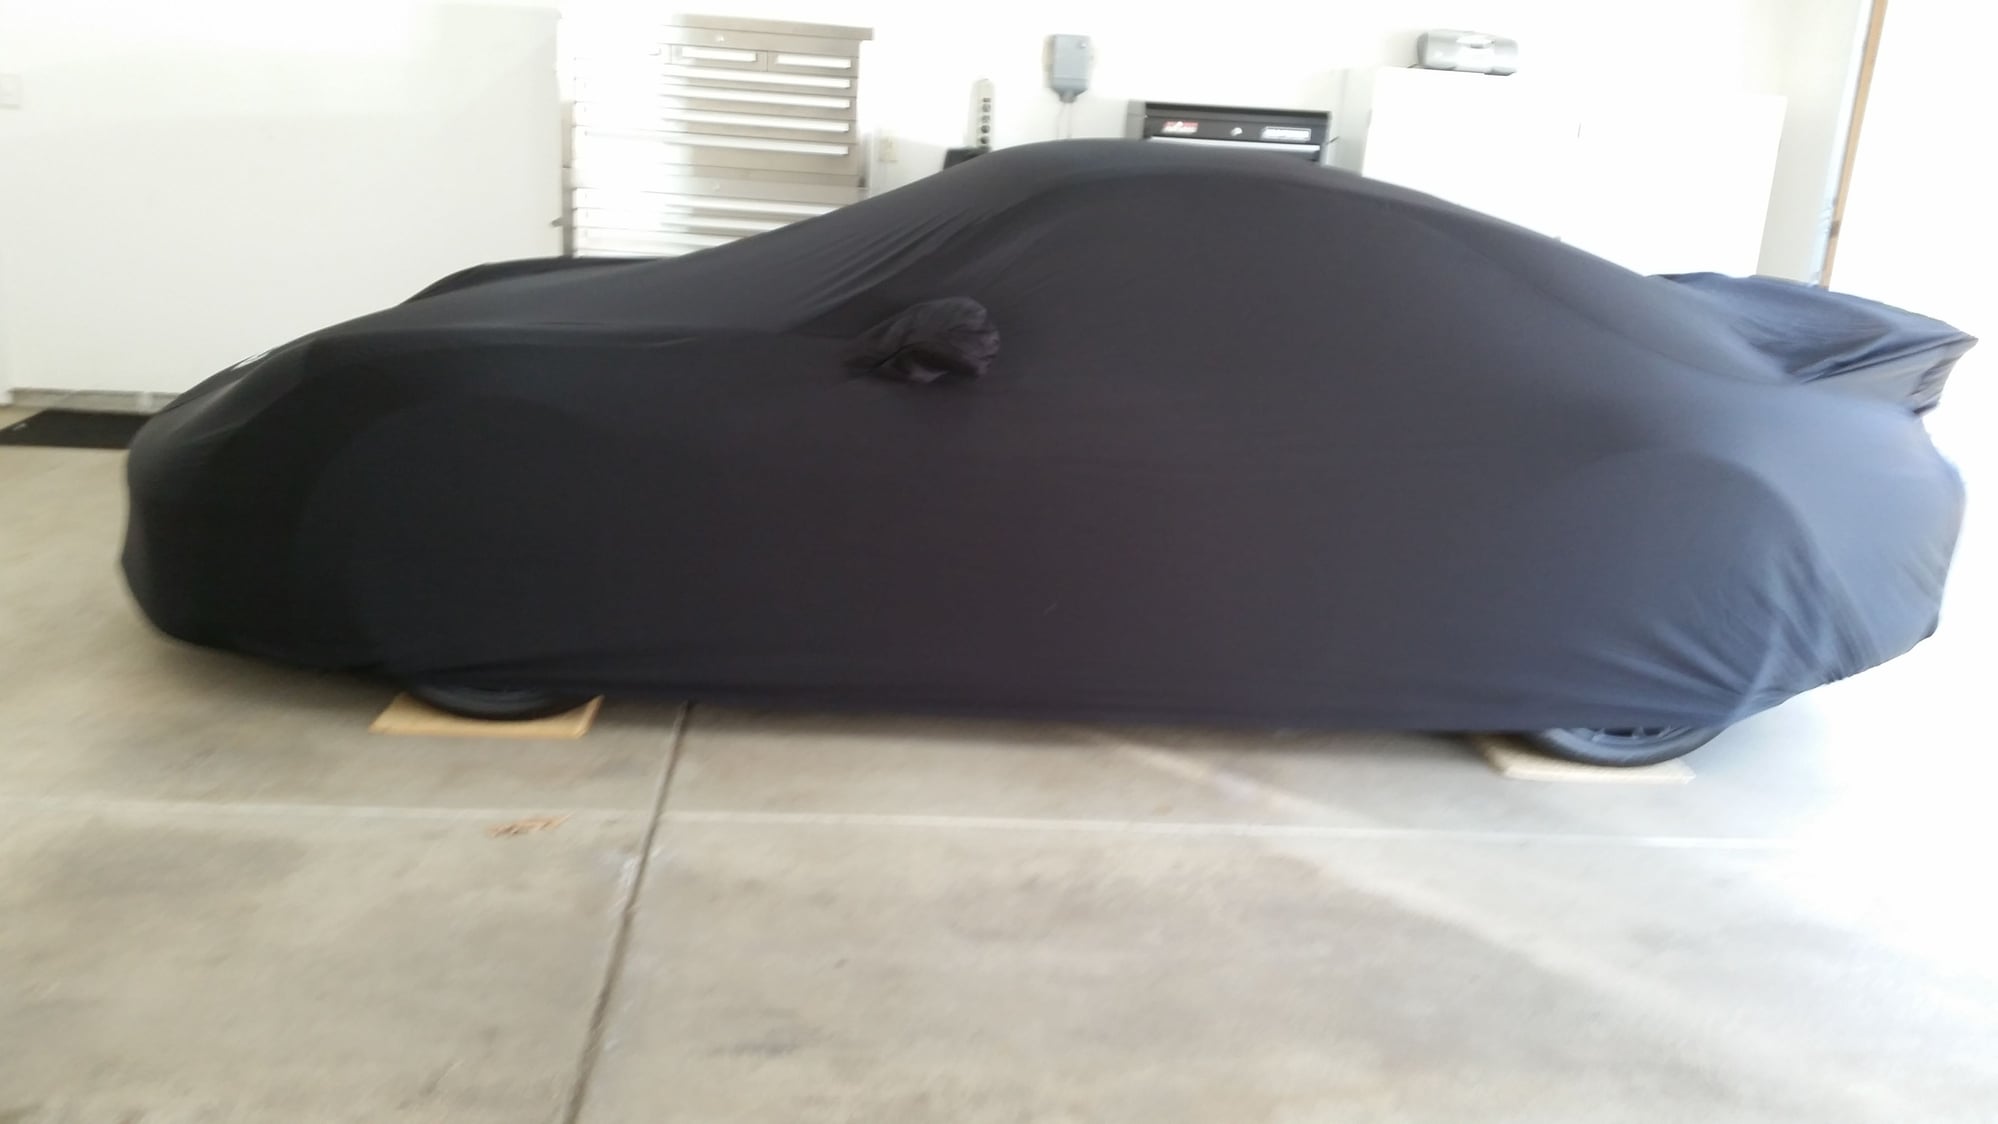 FS Black Coverking Satin Stretch Car Cover. Fits 911, 991 with